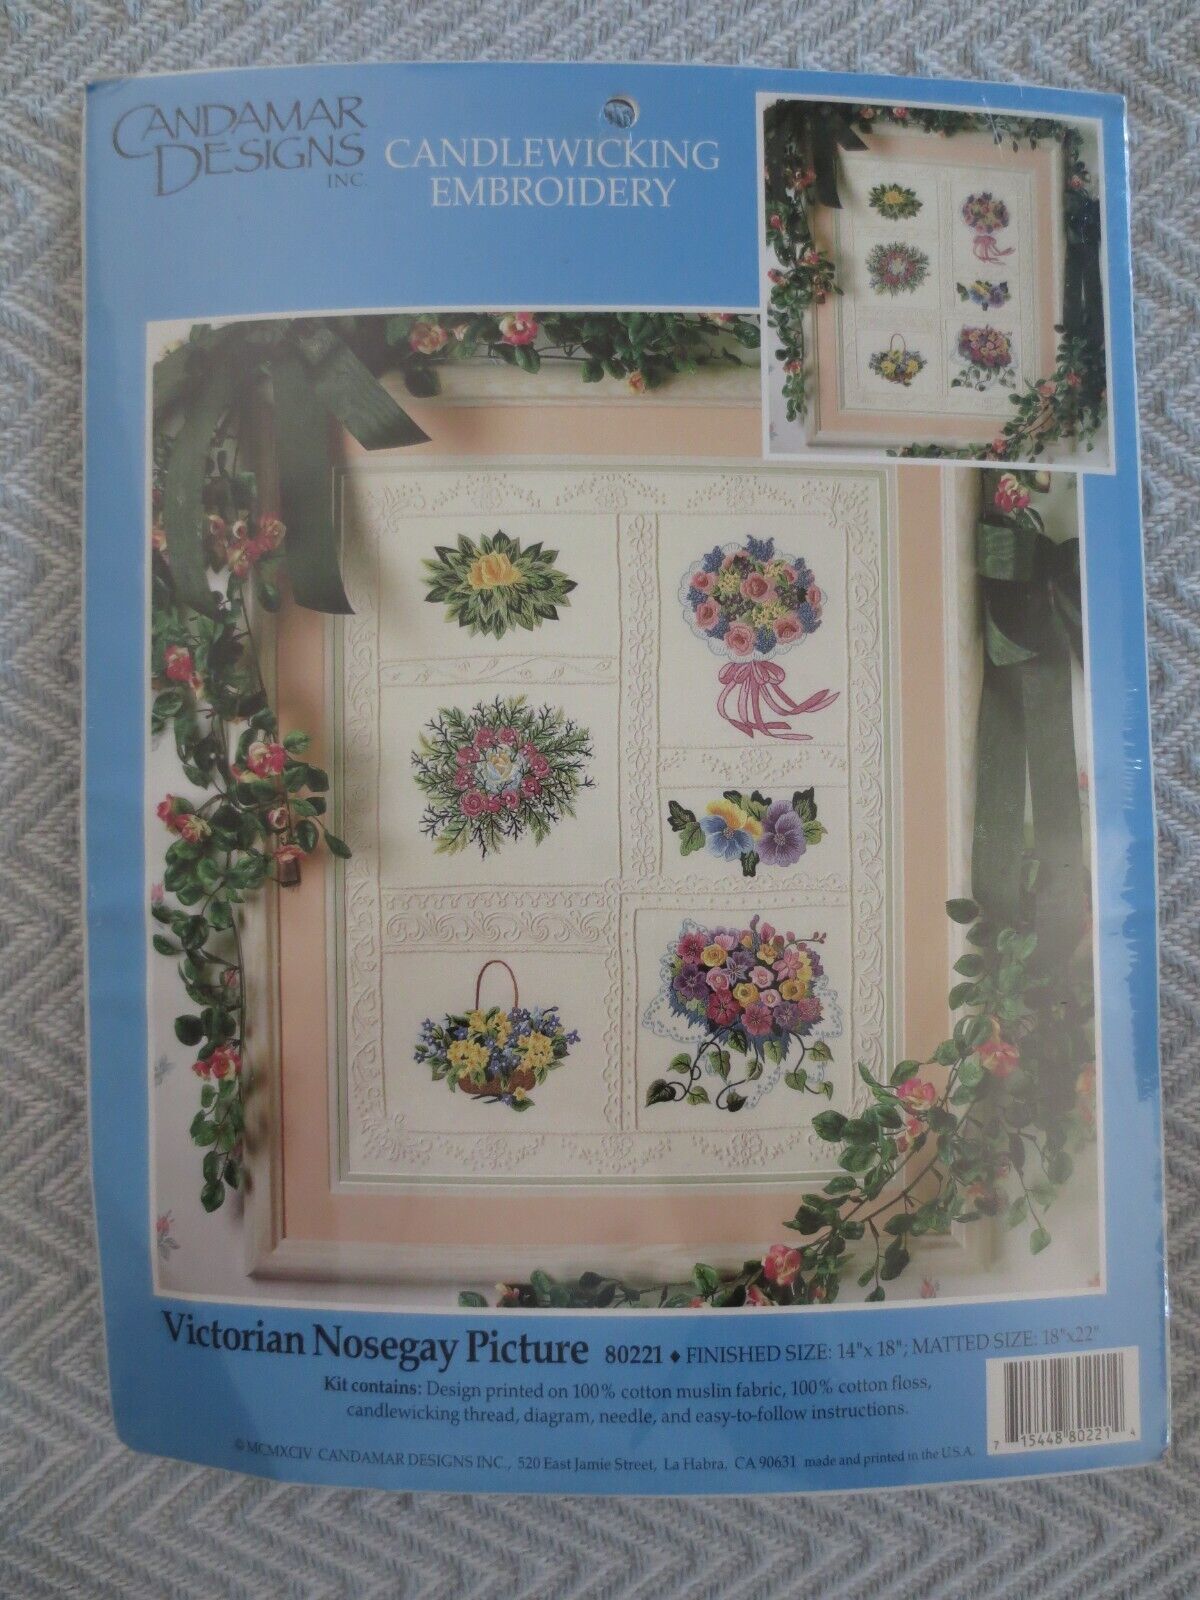 SEALED Candamar VICTORIAN NOSEGAY PICTURE Candlewicking Embroidery KIT #80221 - $12.00